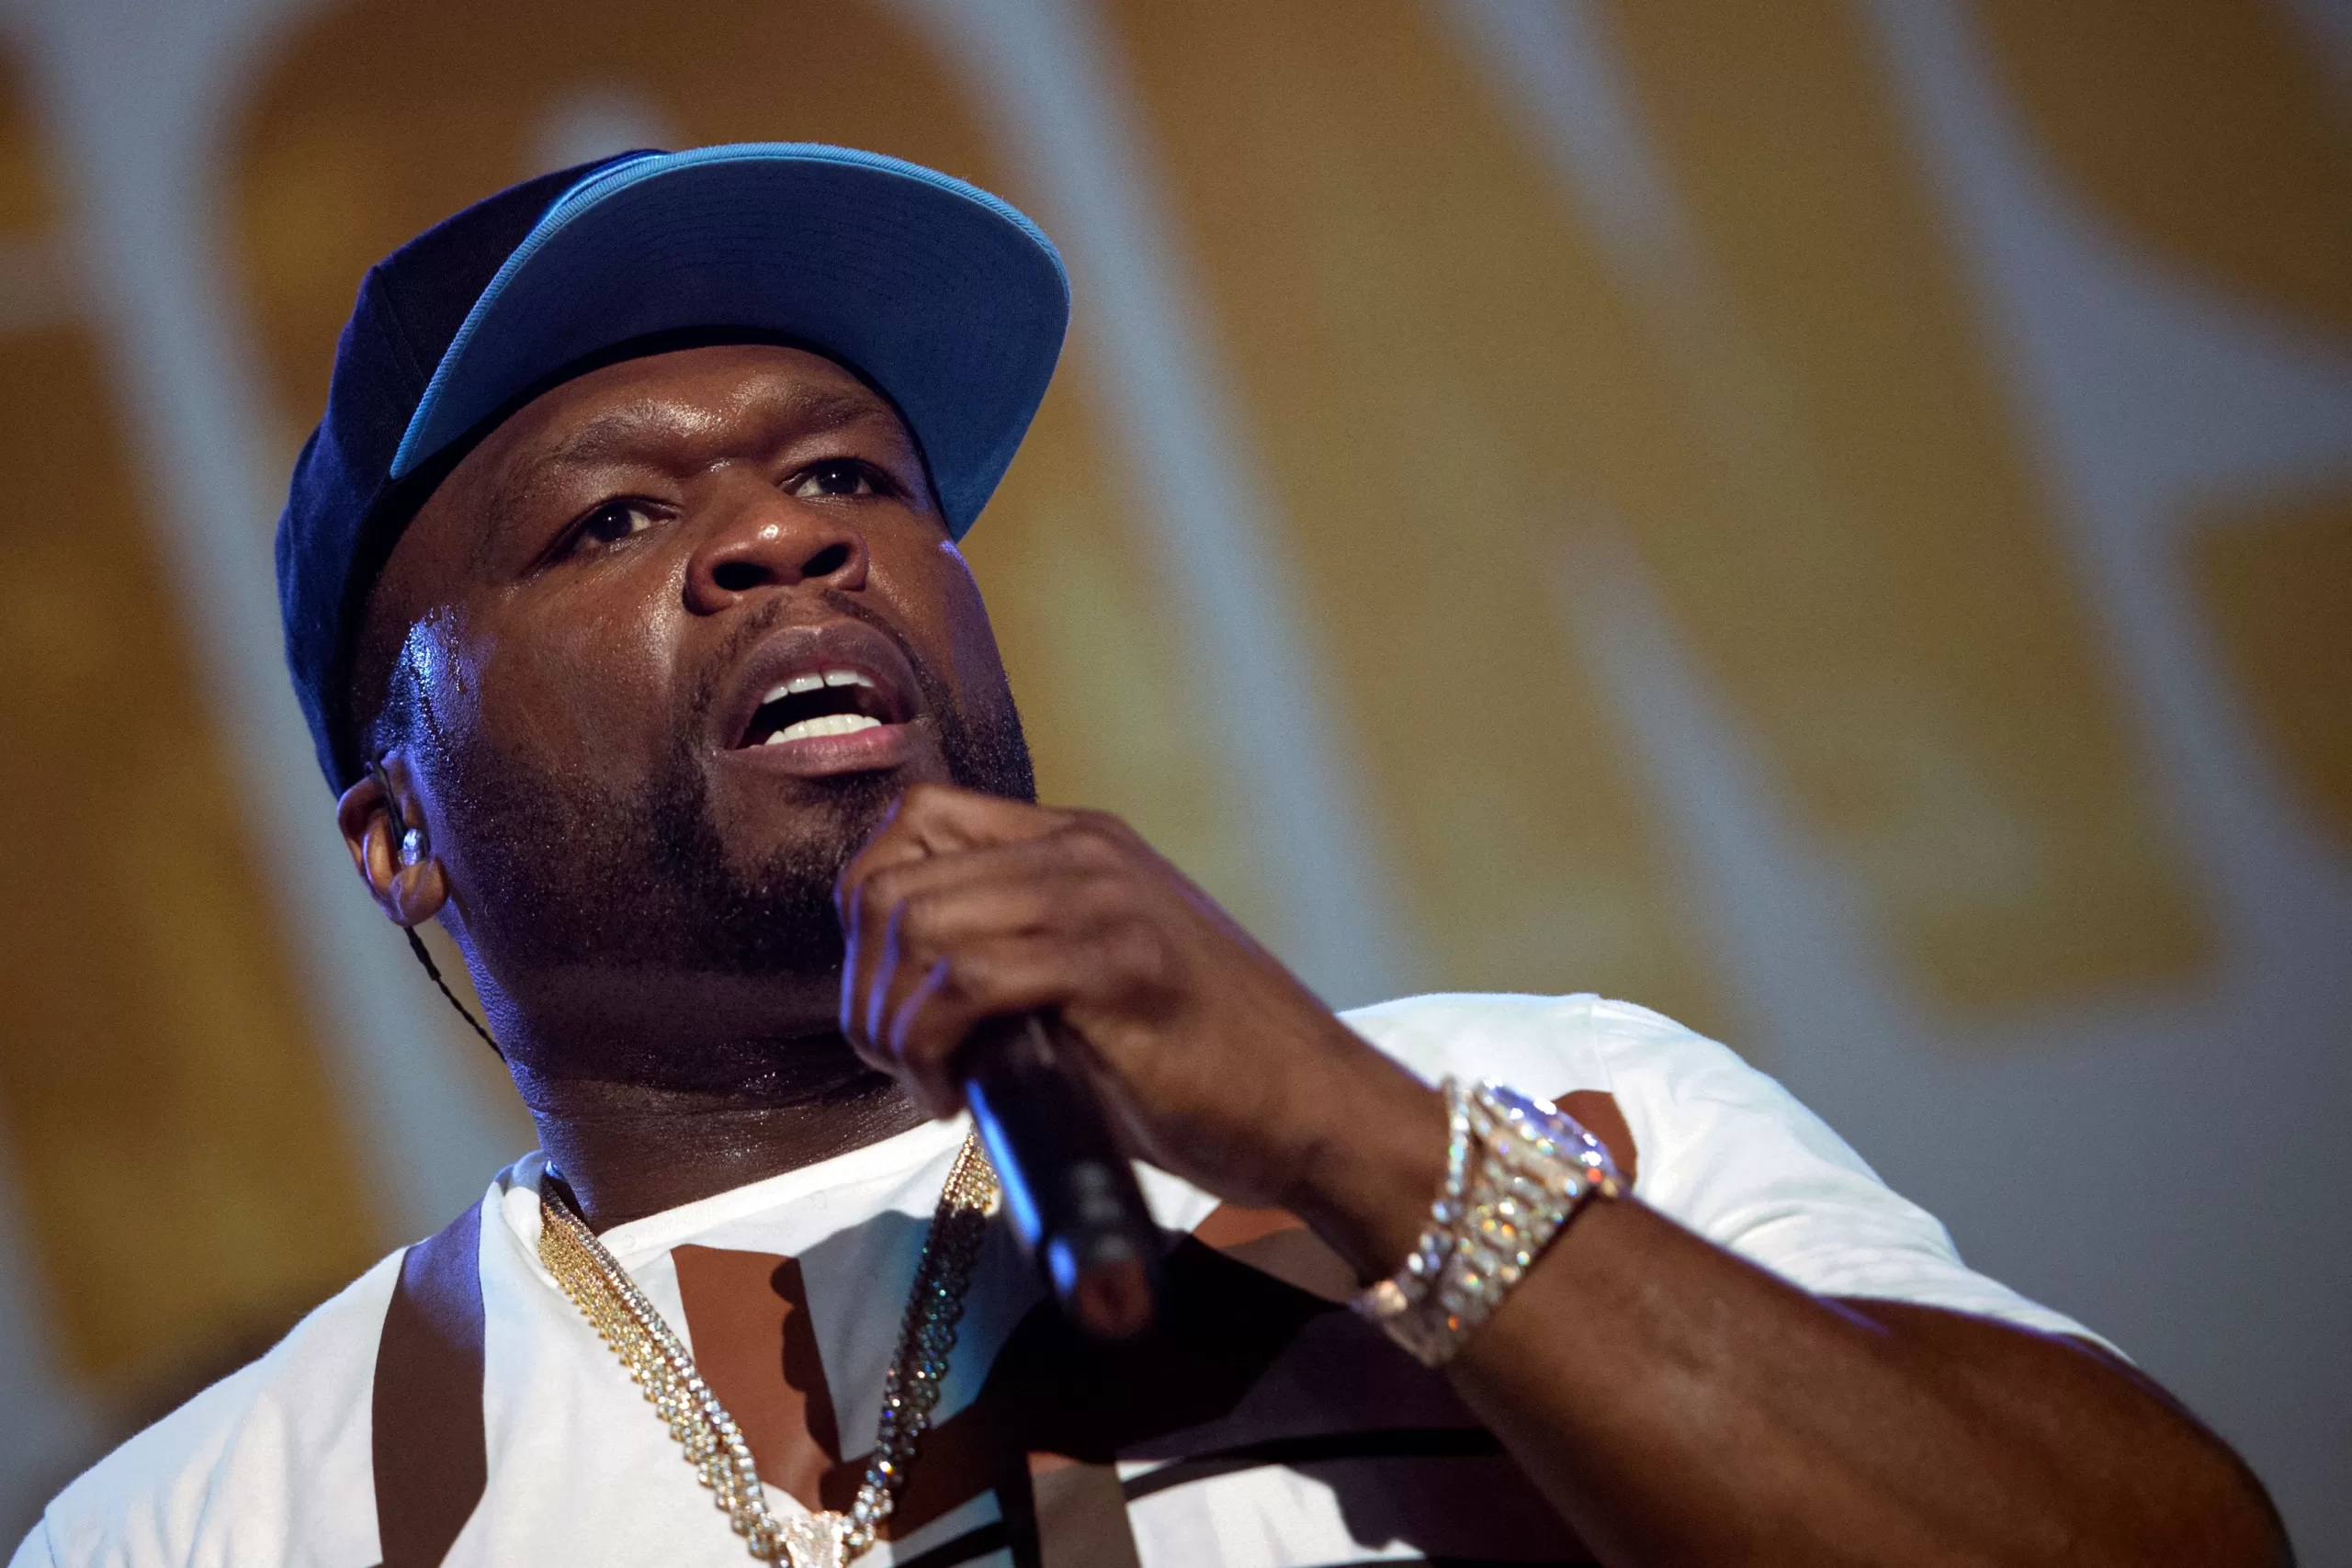 Read more about the article 50 Cent gets angry and throws his microphone at a fan: He faces criminal investigation